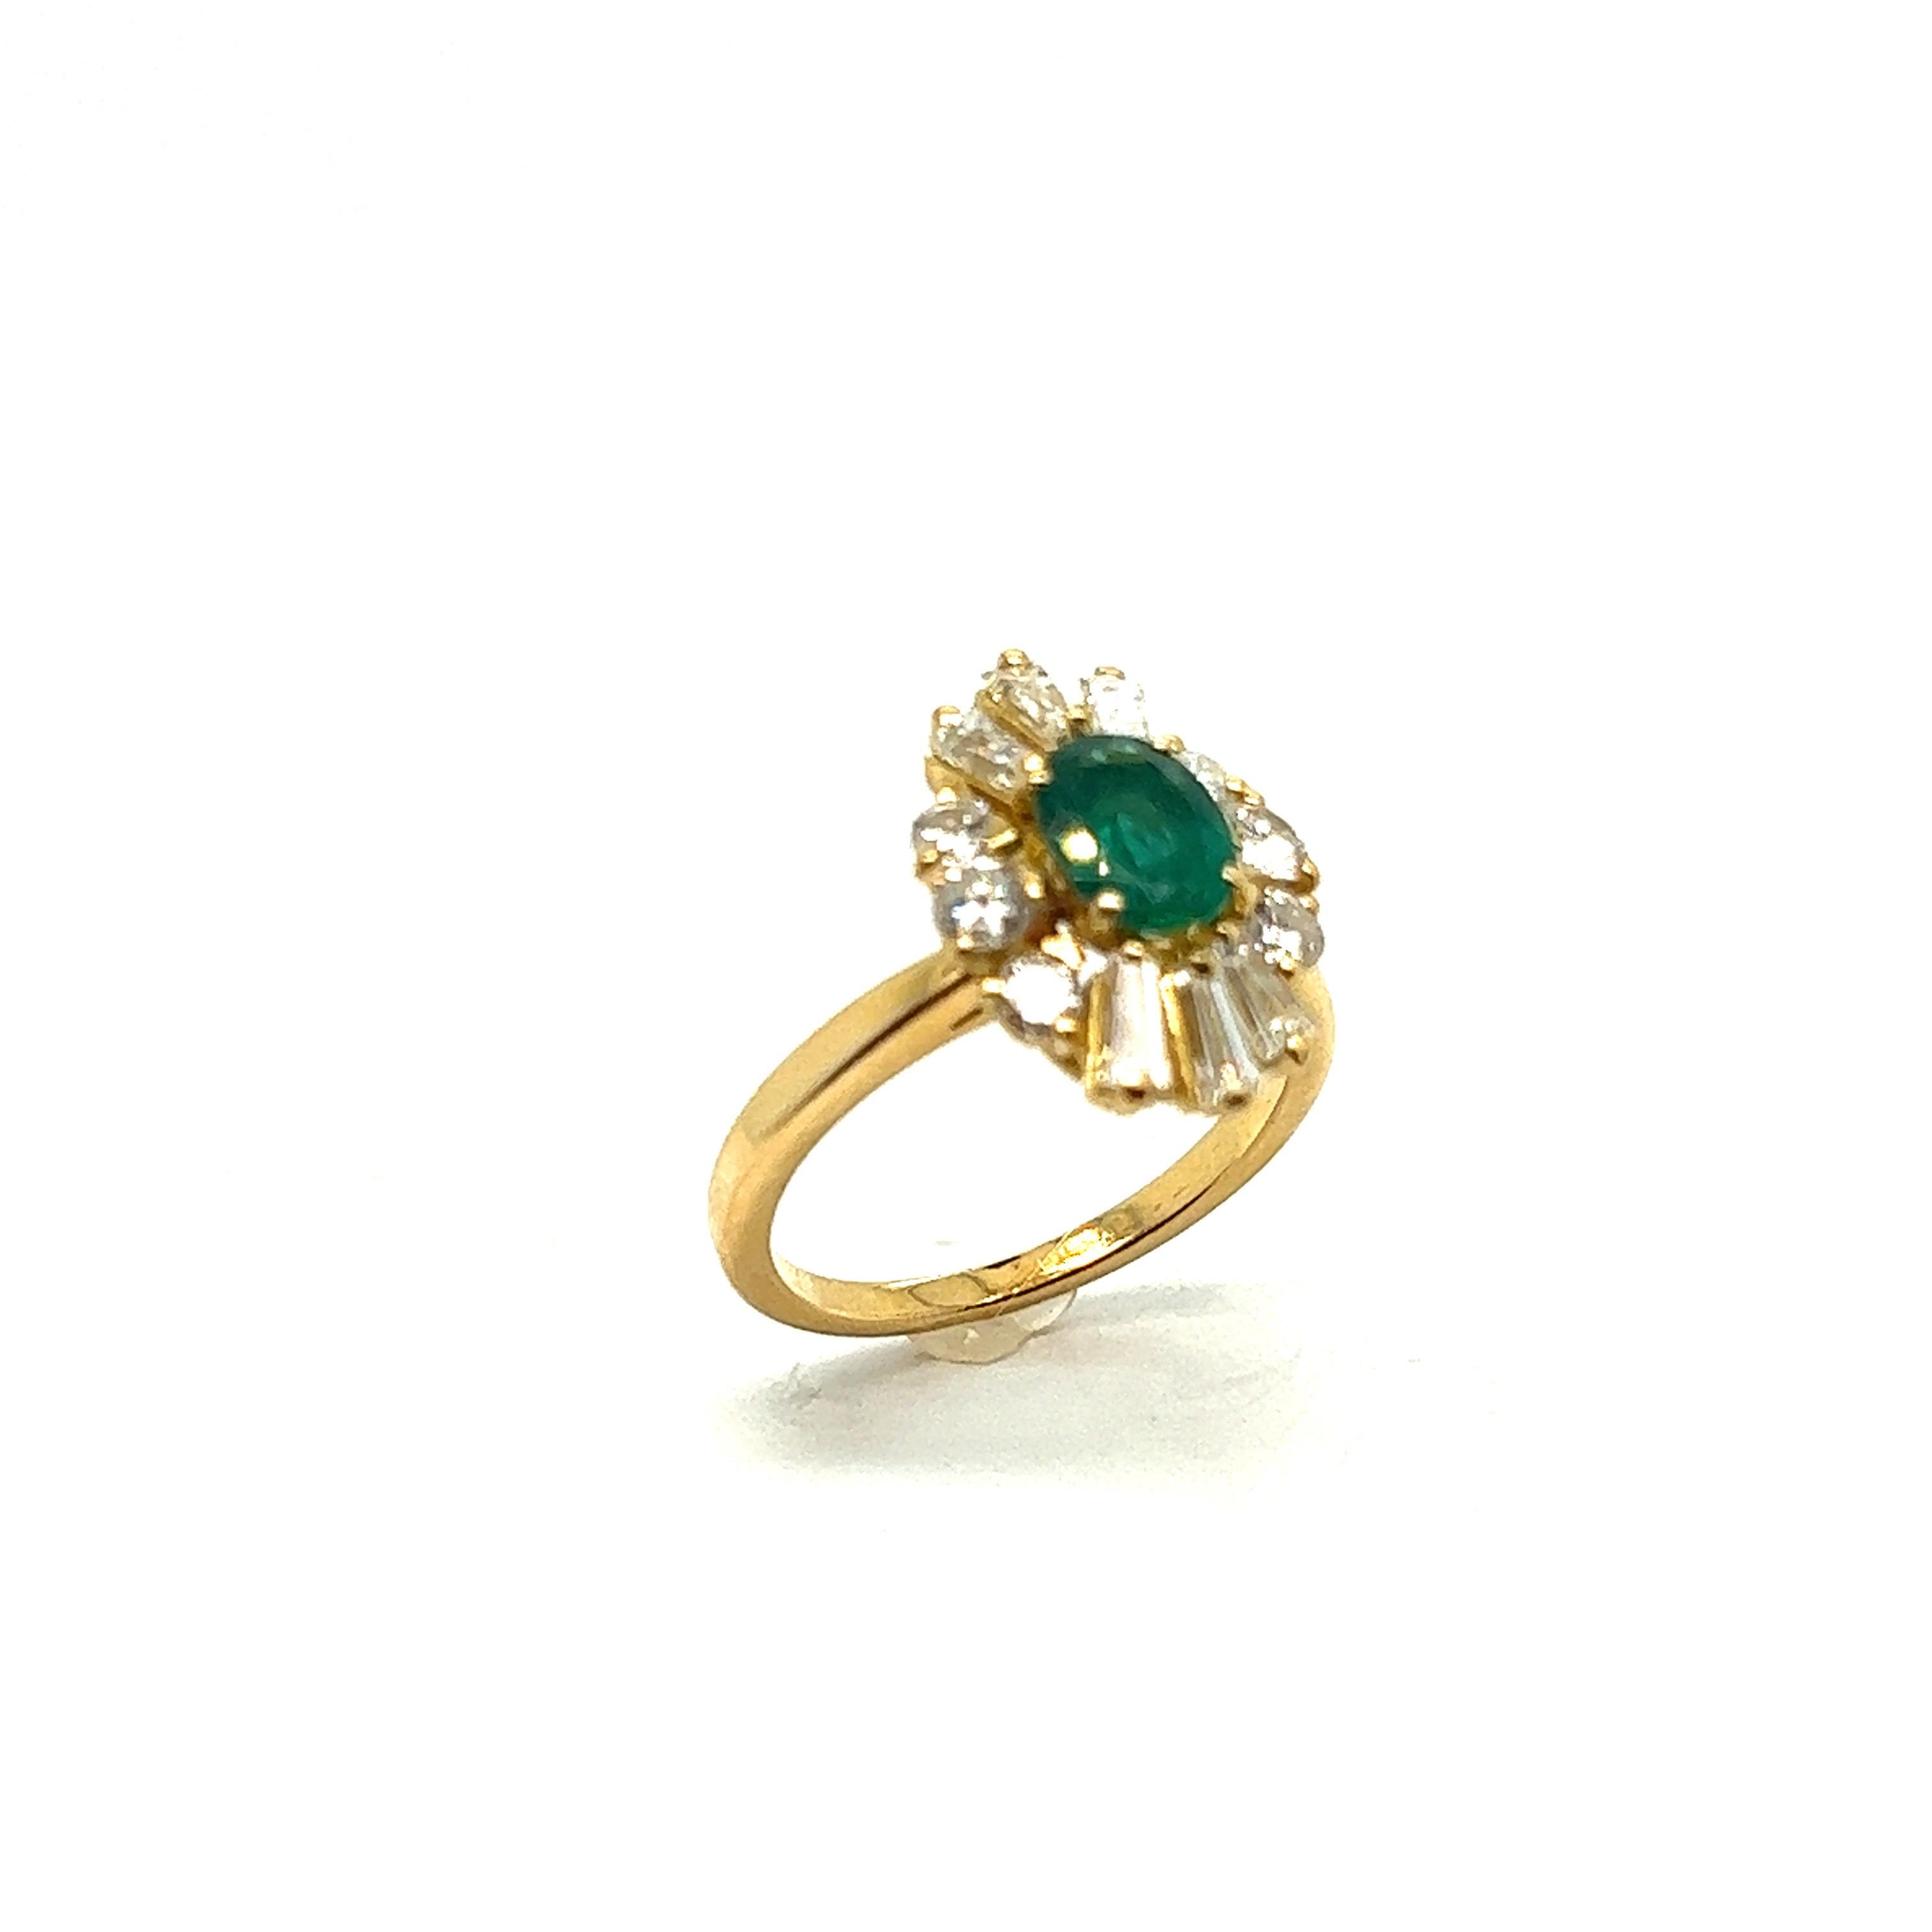 Discover this magnificent French ring topped with an exceptional oval emerald, set with 12 sparkling diamonds, all designed in 18-carat white gold. This exceptional piece embodies elegance and refinement, with a design that's sure to captivate every